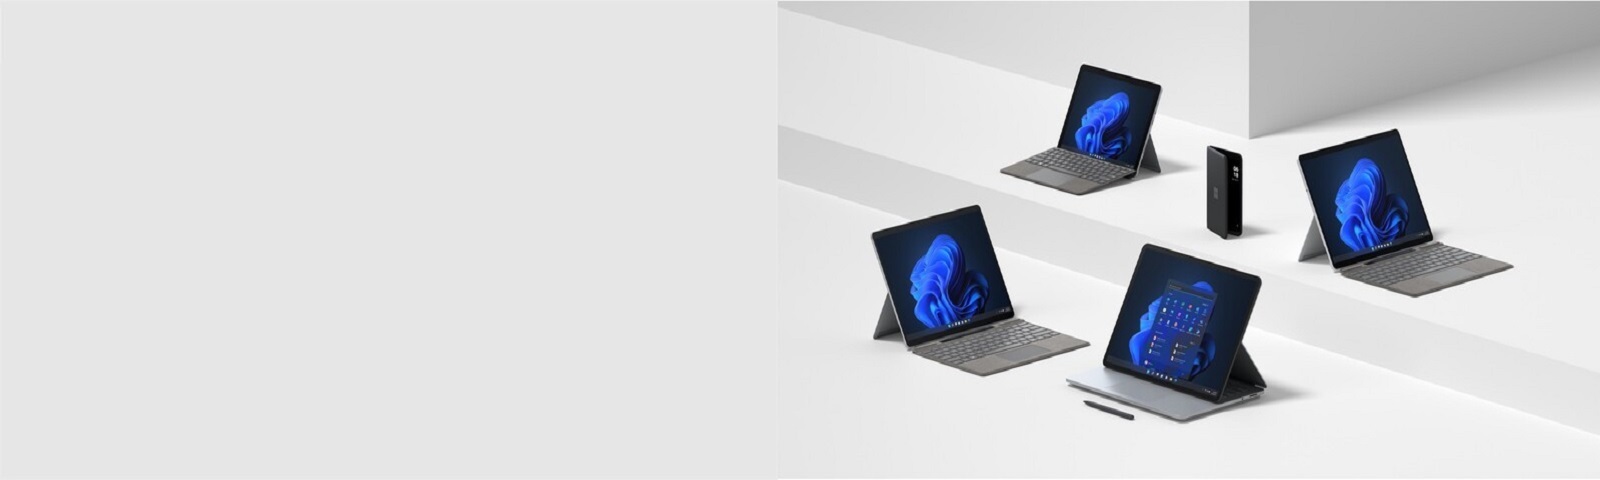 September 2021 briefing | New Surface devices, now with Windows 11